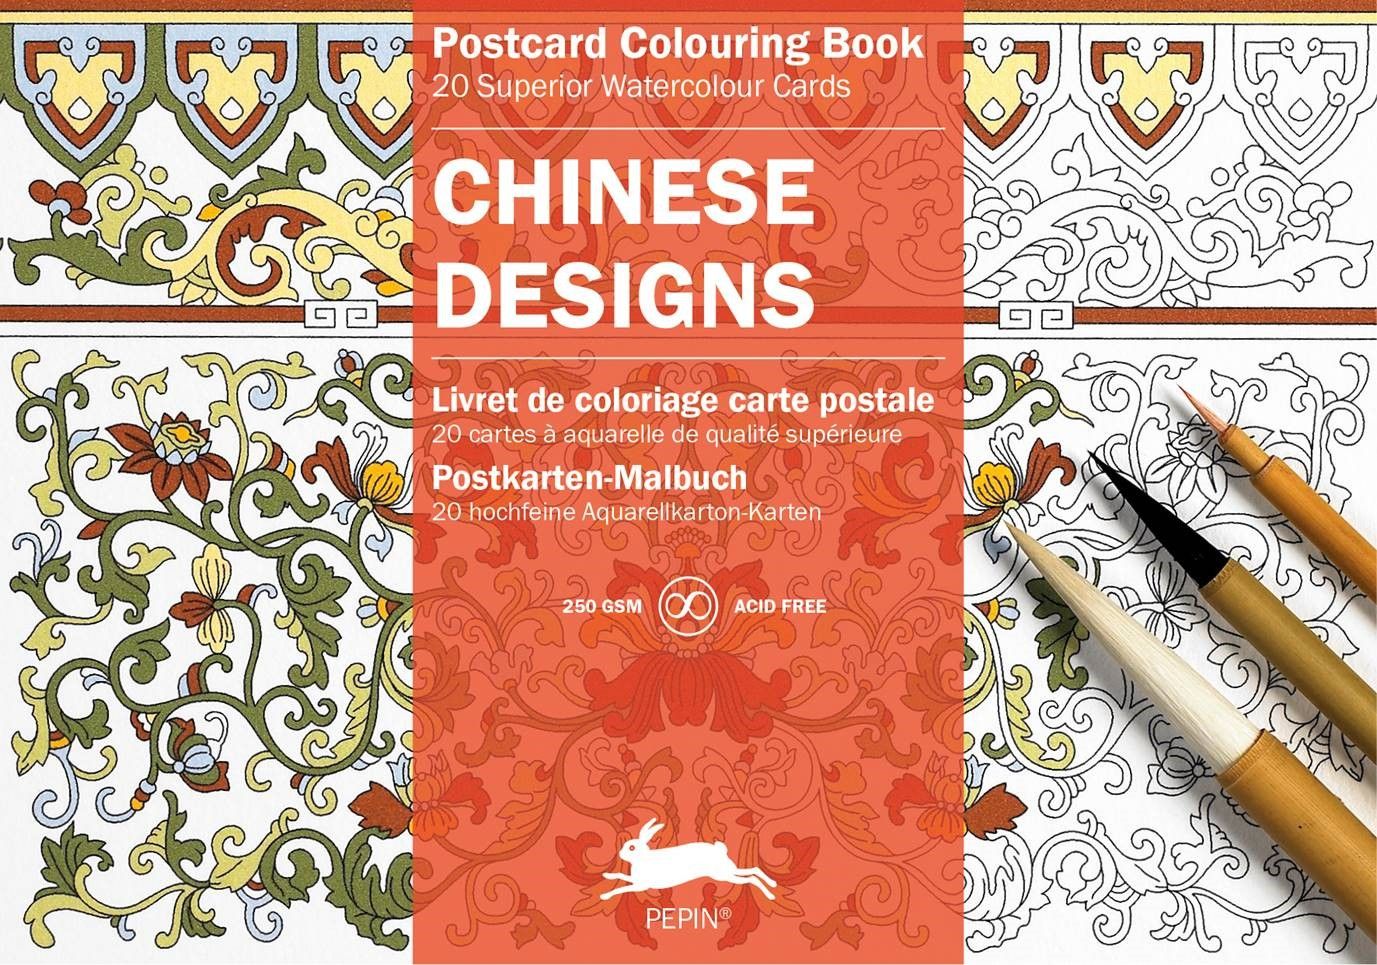 CHINESE DESIGNS: PEPIN POSTCARD COLOURING BOOK